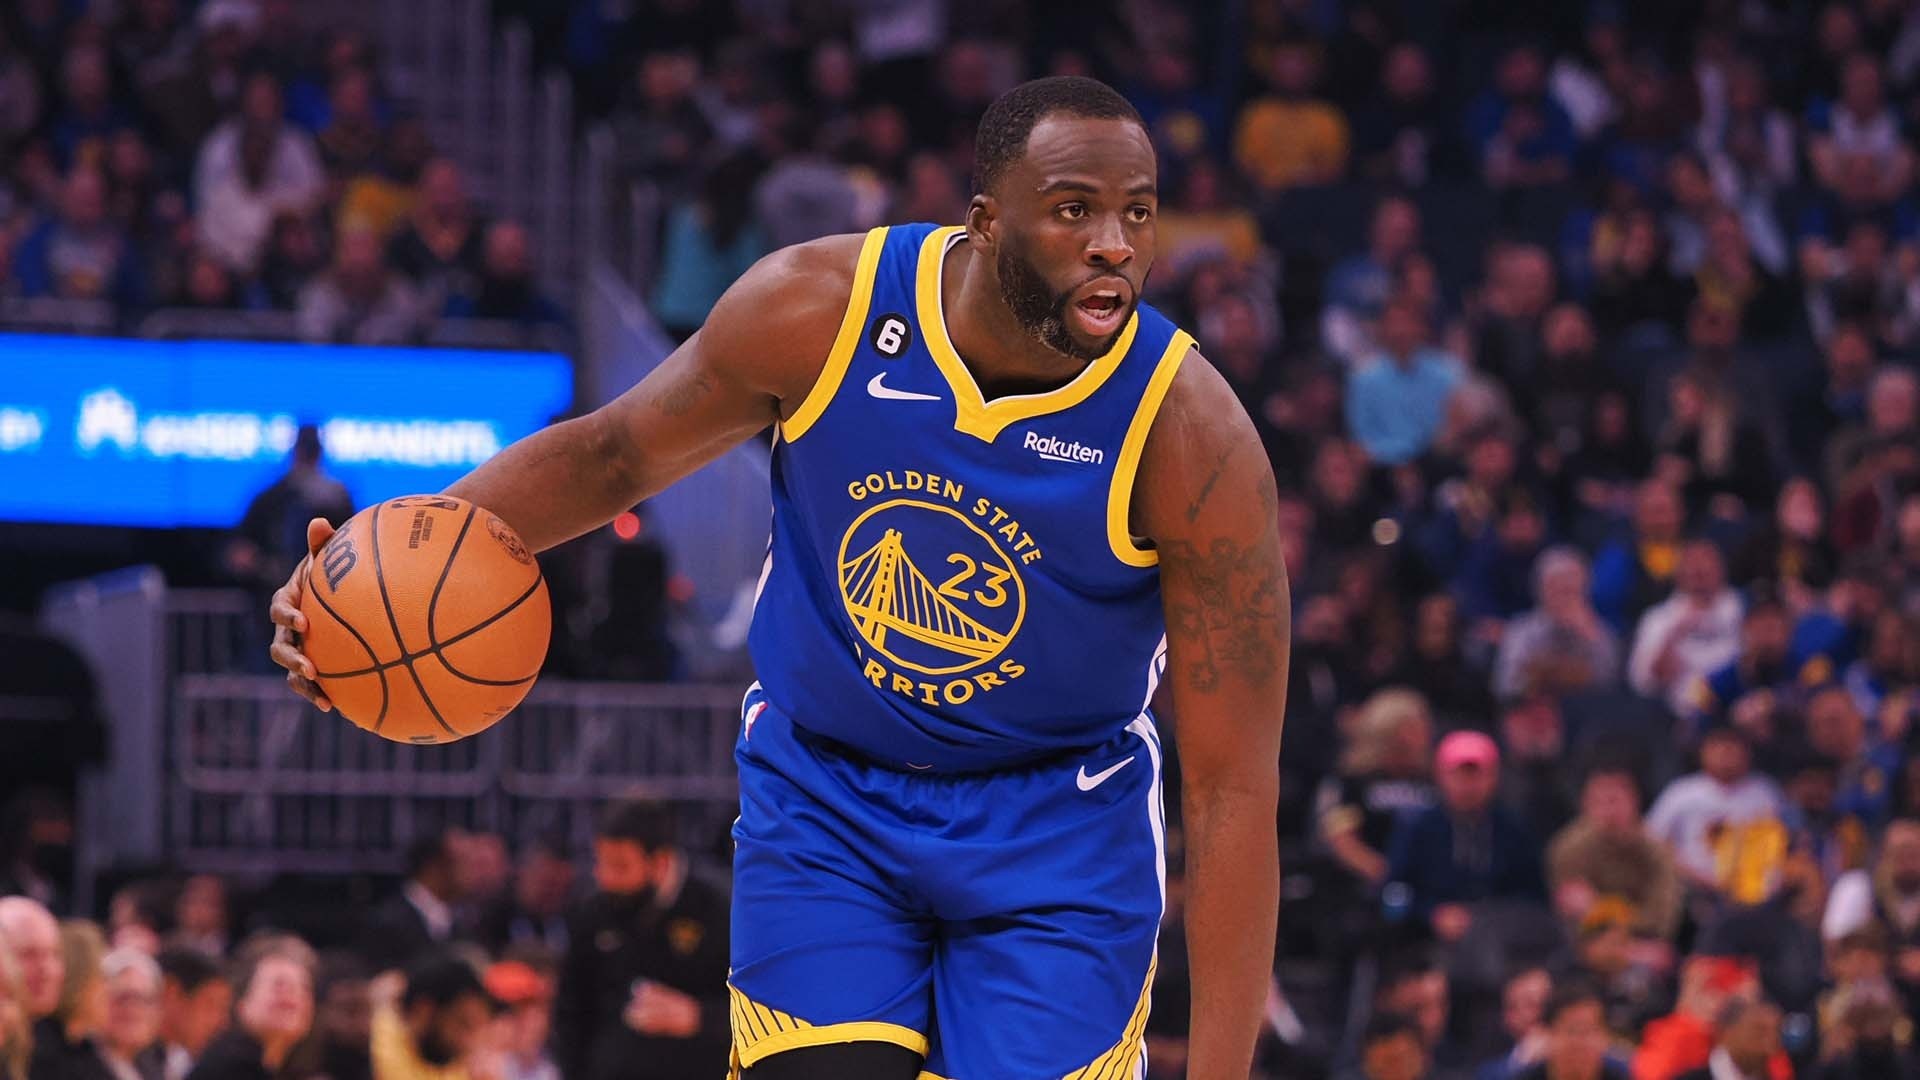 "I know people that were scared of LeBron James": Draymond Green takes no prisoners in scathing King James defense against Mario Chalmers